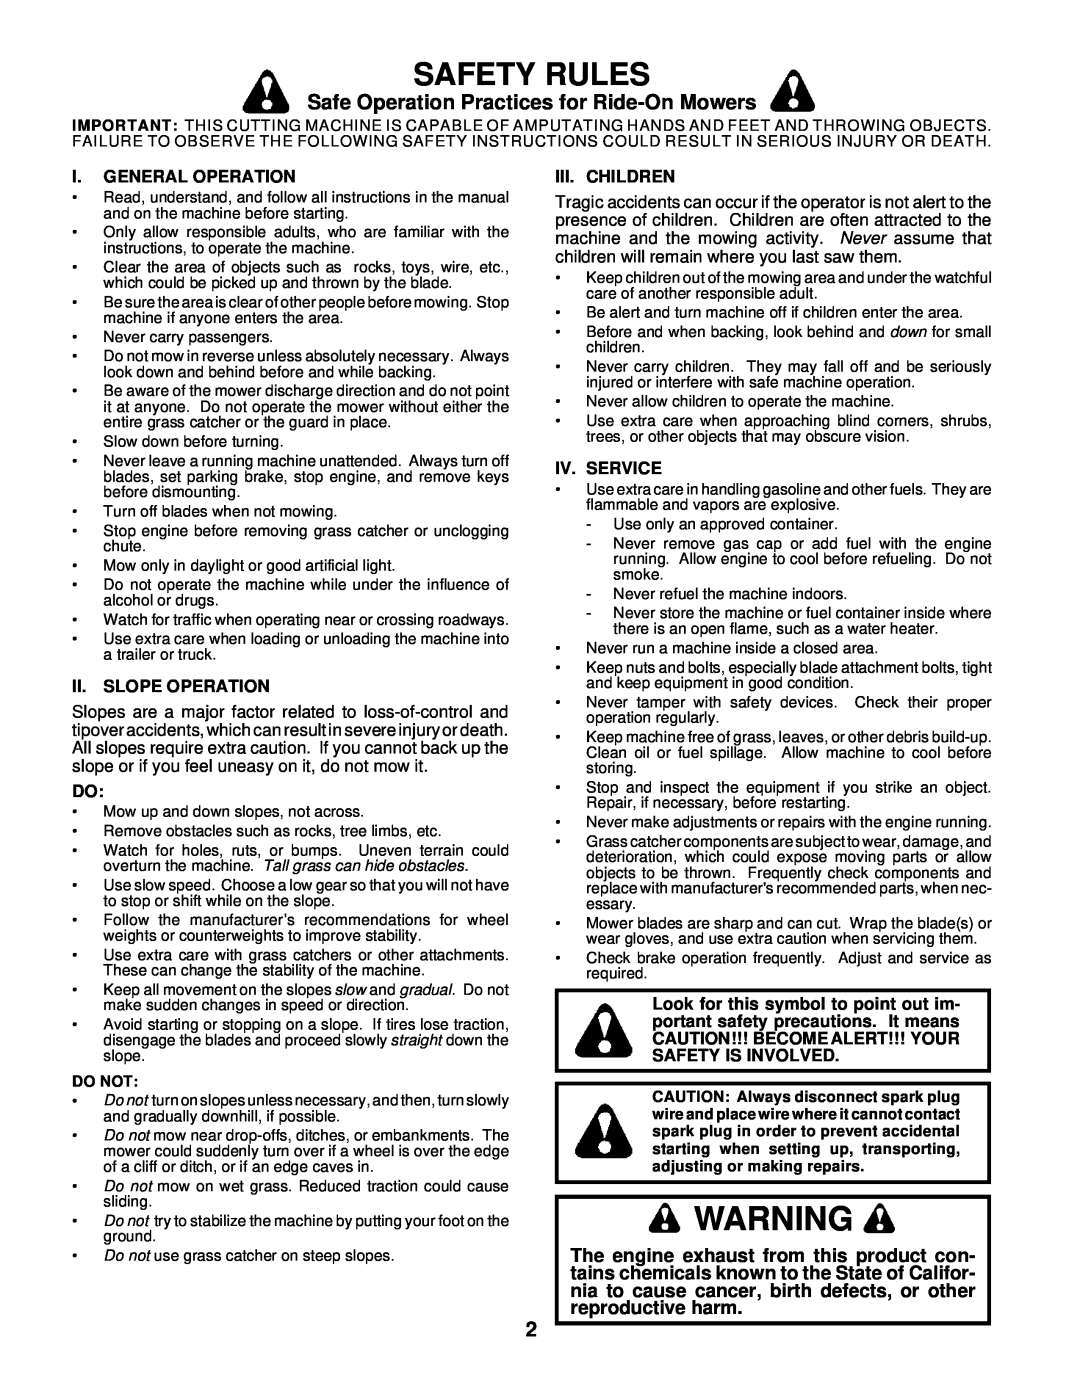 Husqvarna GTH220 Safety Rules, Safe Operation Practices for Ride-On Mowers, I. General Operation, Ii. Slope Operation 